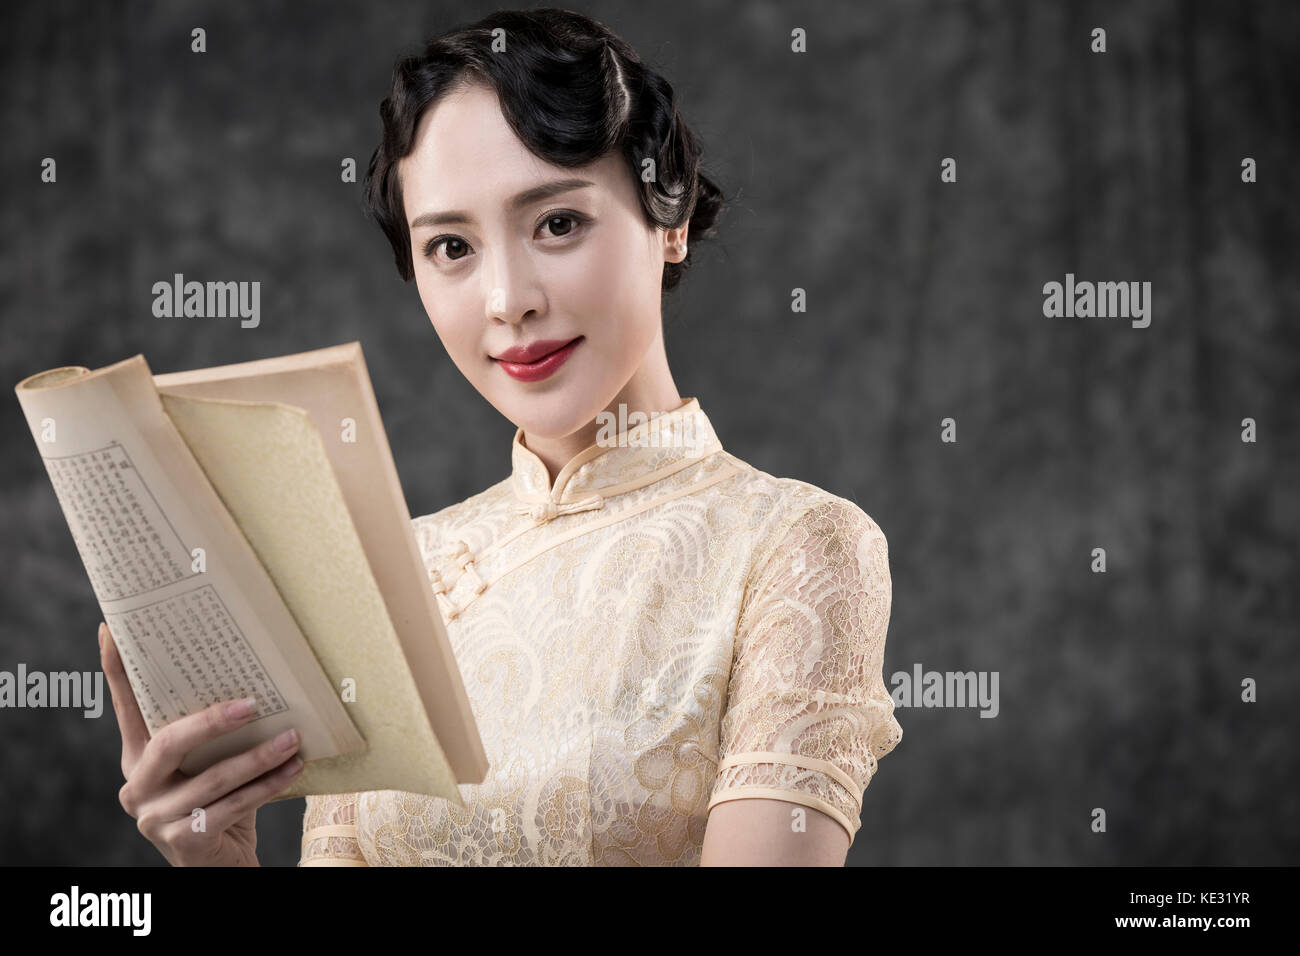 Portrait of young smiling woman in retro-style oriental clothes posing with book Stock Photo